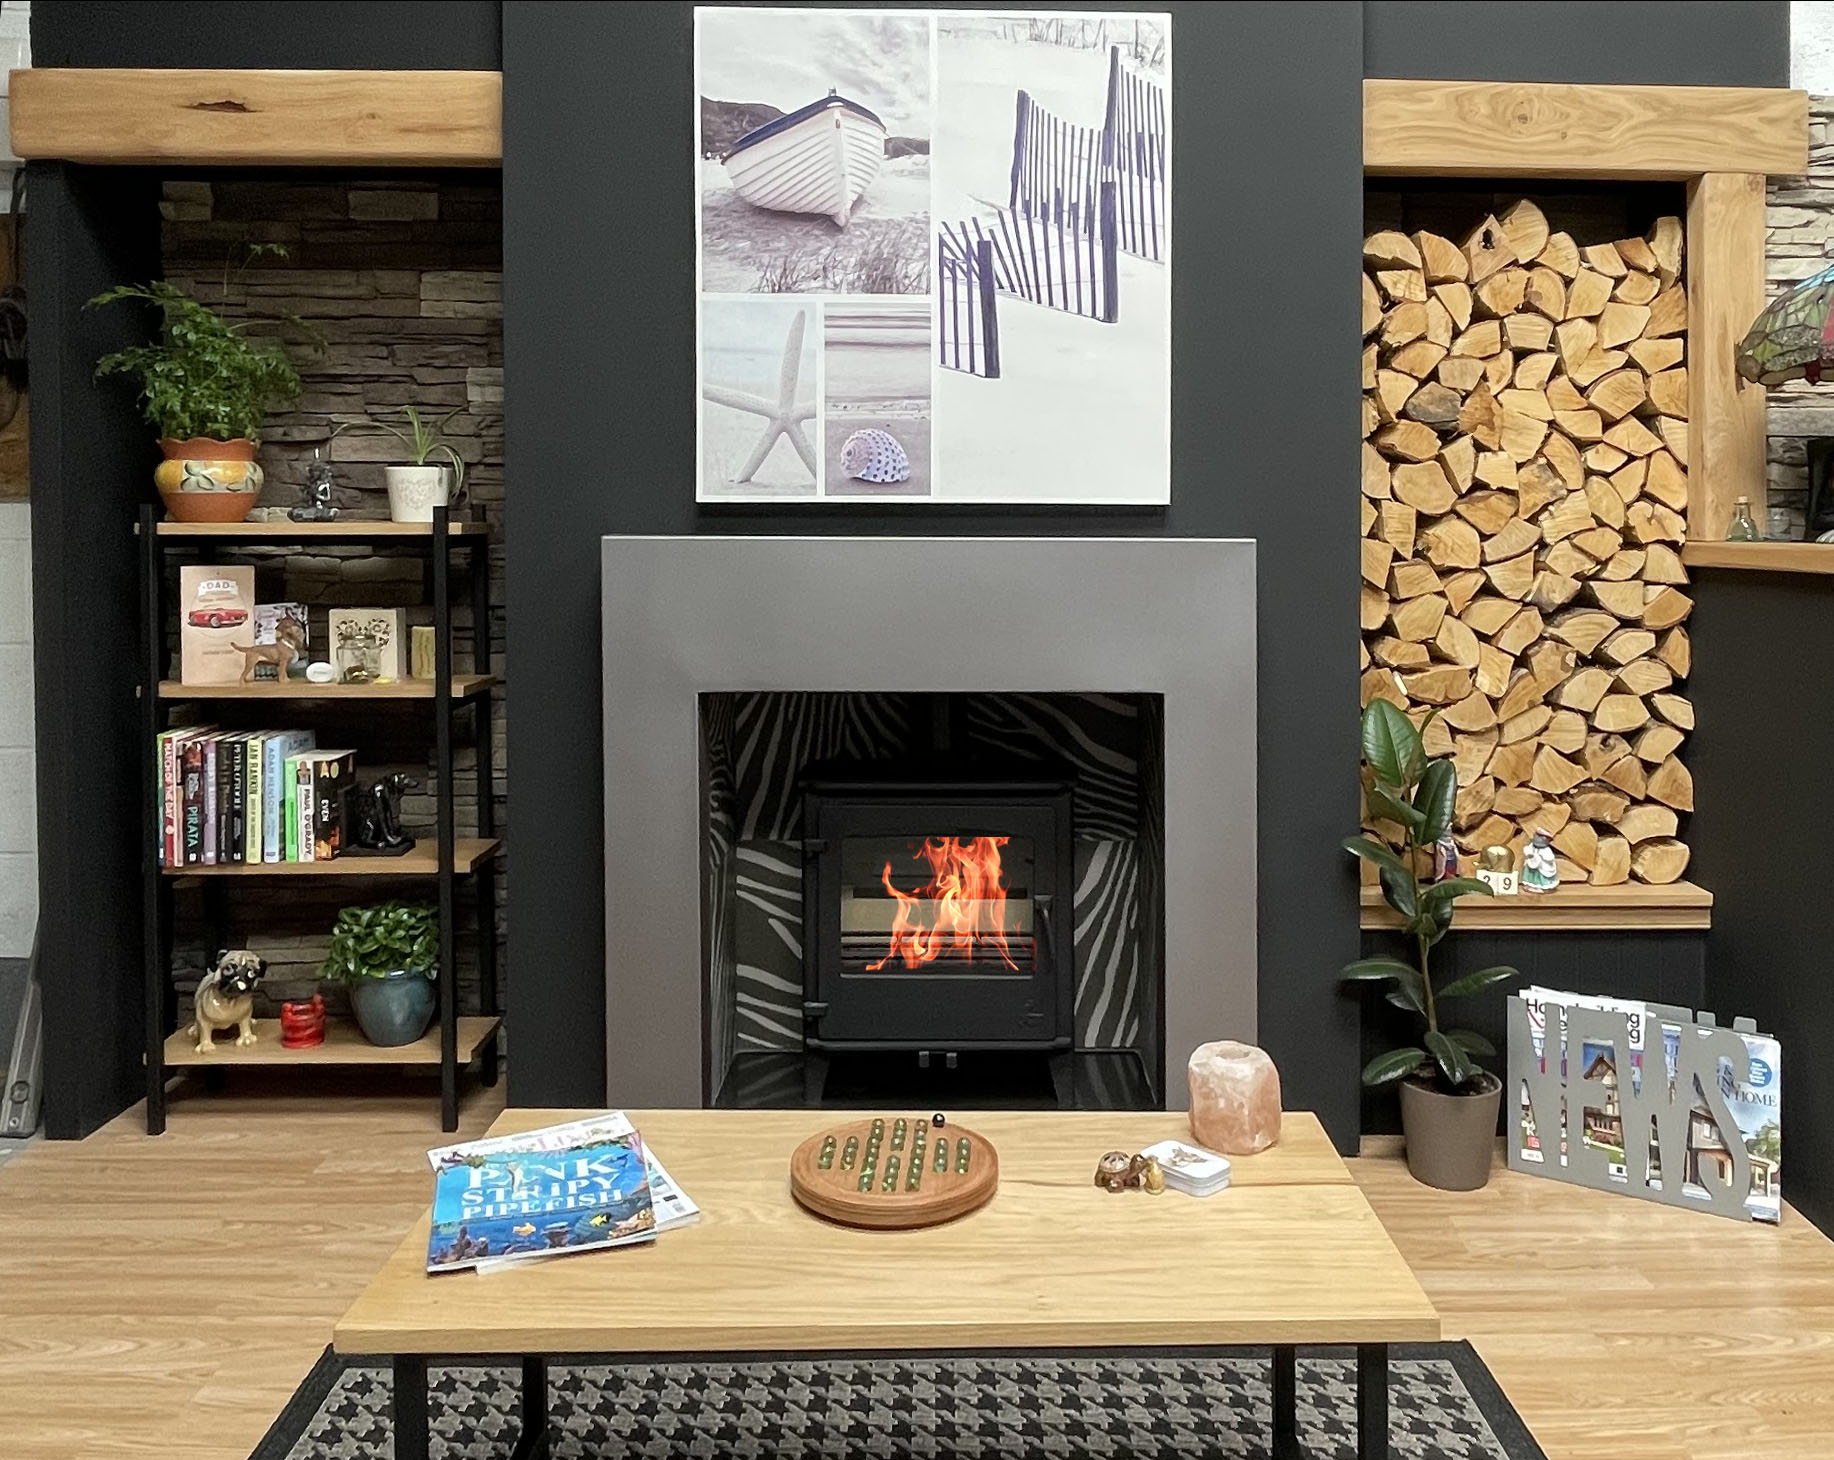 This kit is for Wood Burners, Gas and Multi-fuel stoves. You must use this metal framework kit to meet current energy regulations. 